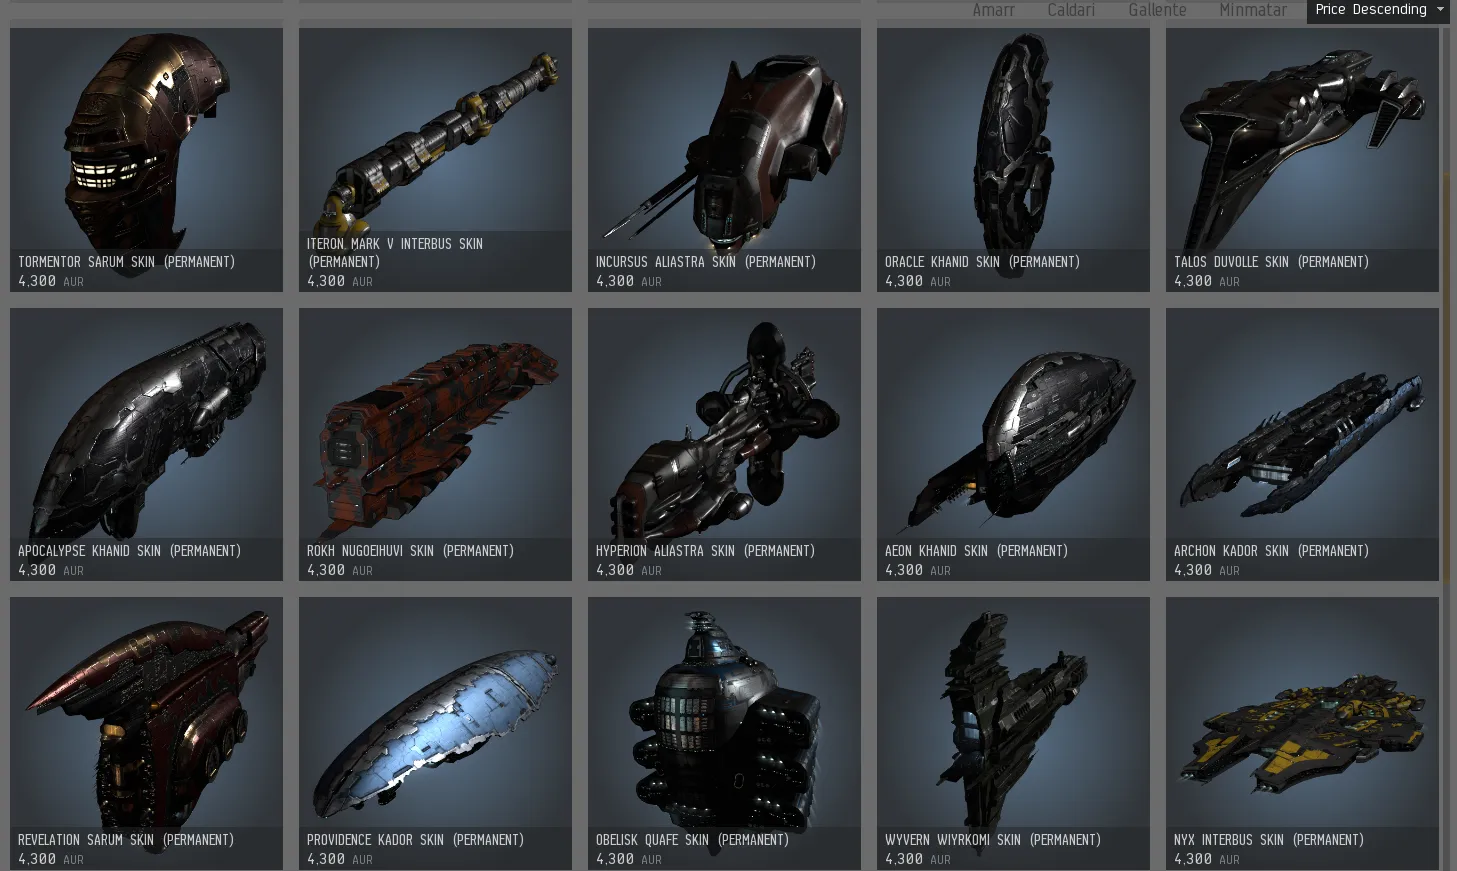 Some of the in-game skins.